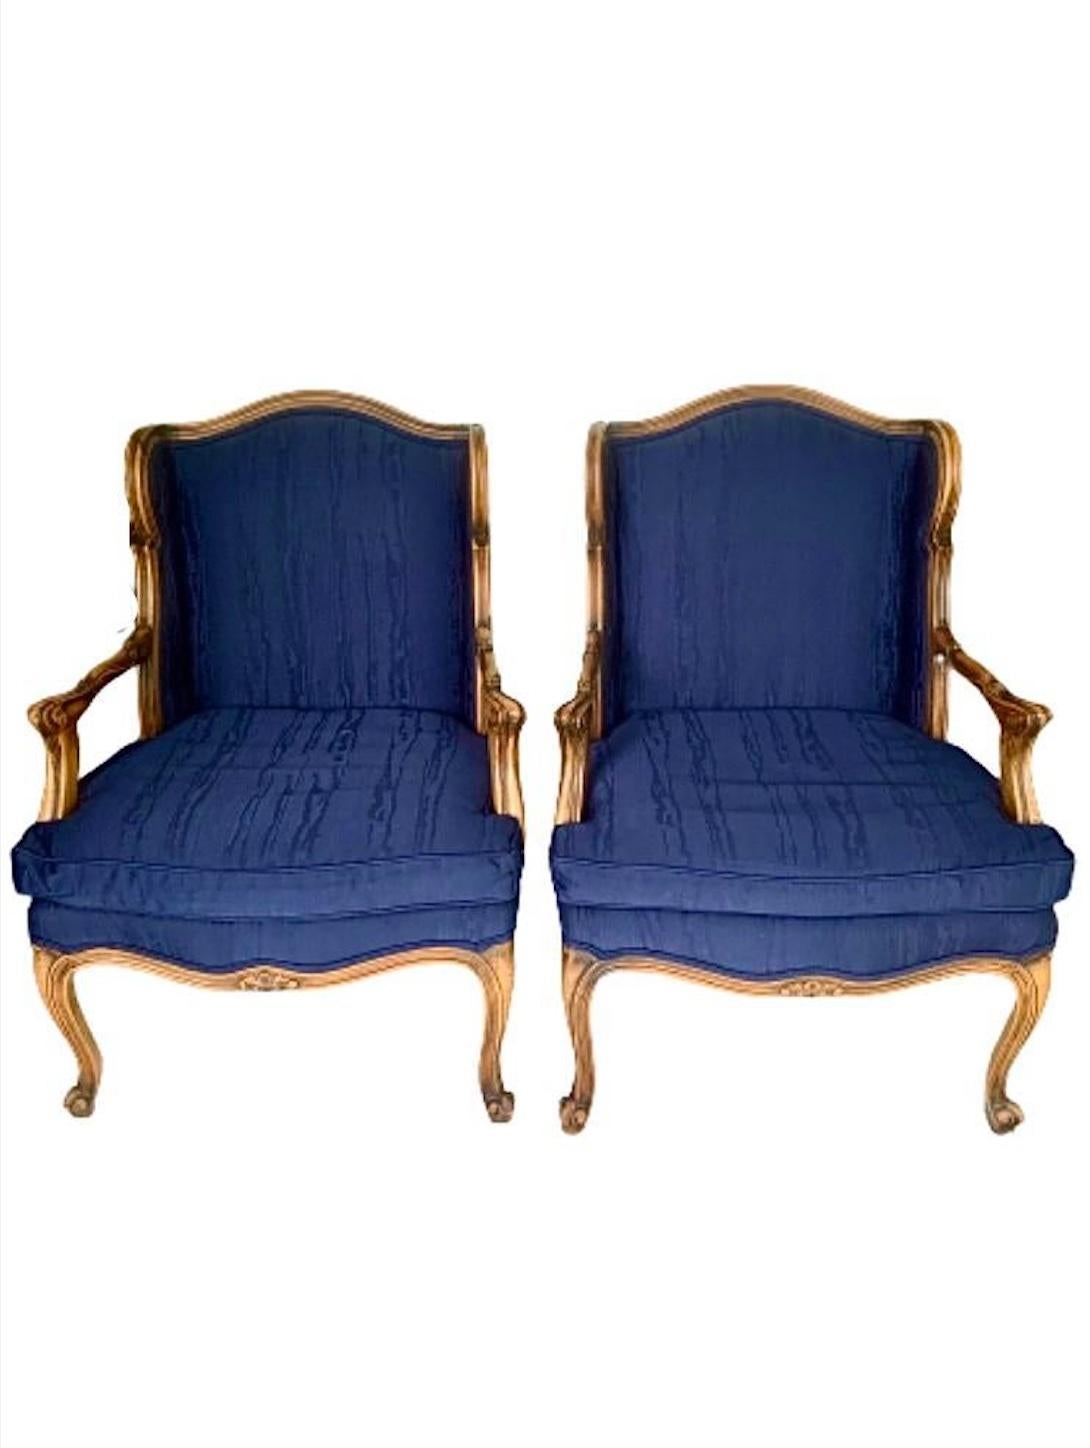 A pair of stunning Louis XV French Provincial style club chairs or lounge chairs.

Carved walnut, with deep blue faux bois patterned upholstery. 

Measures: 26.5